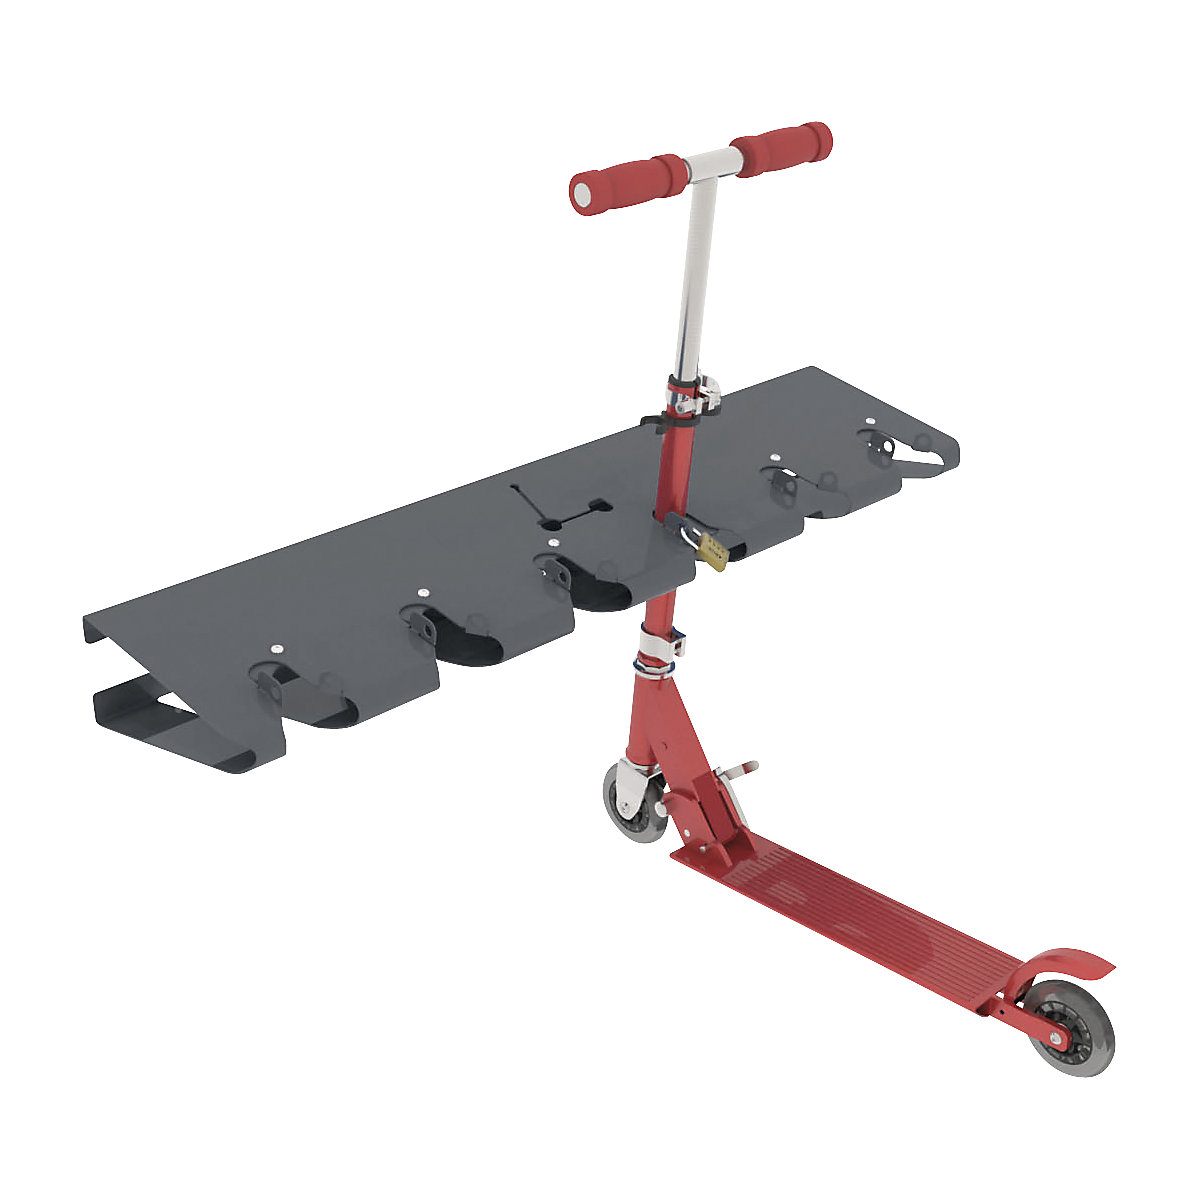 Pedal scooter stand - PROCITY